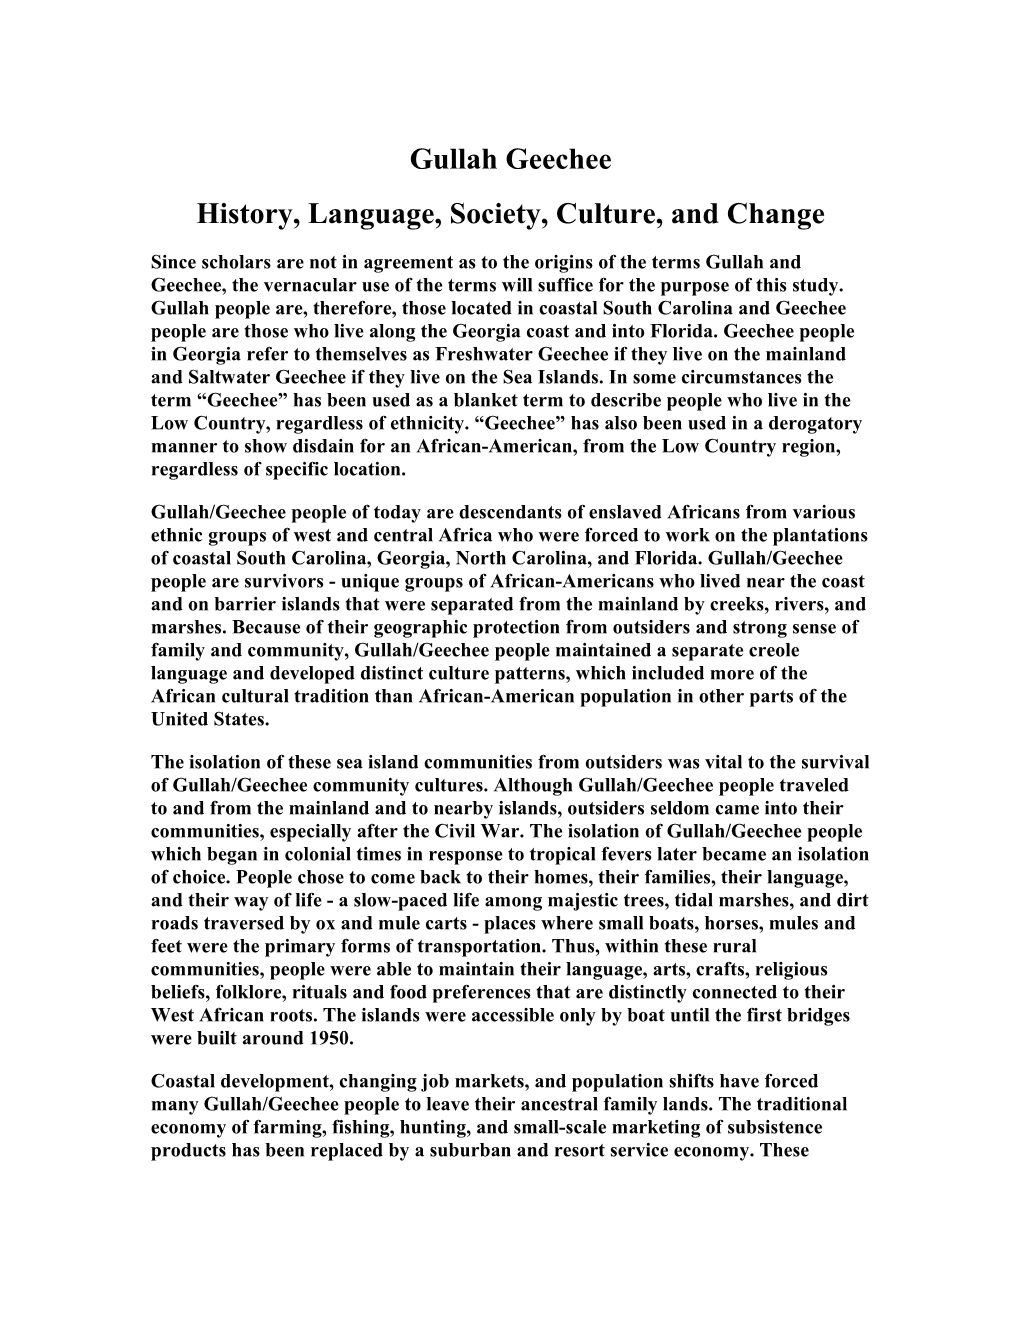 History, Language, Society, Culture, and Change